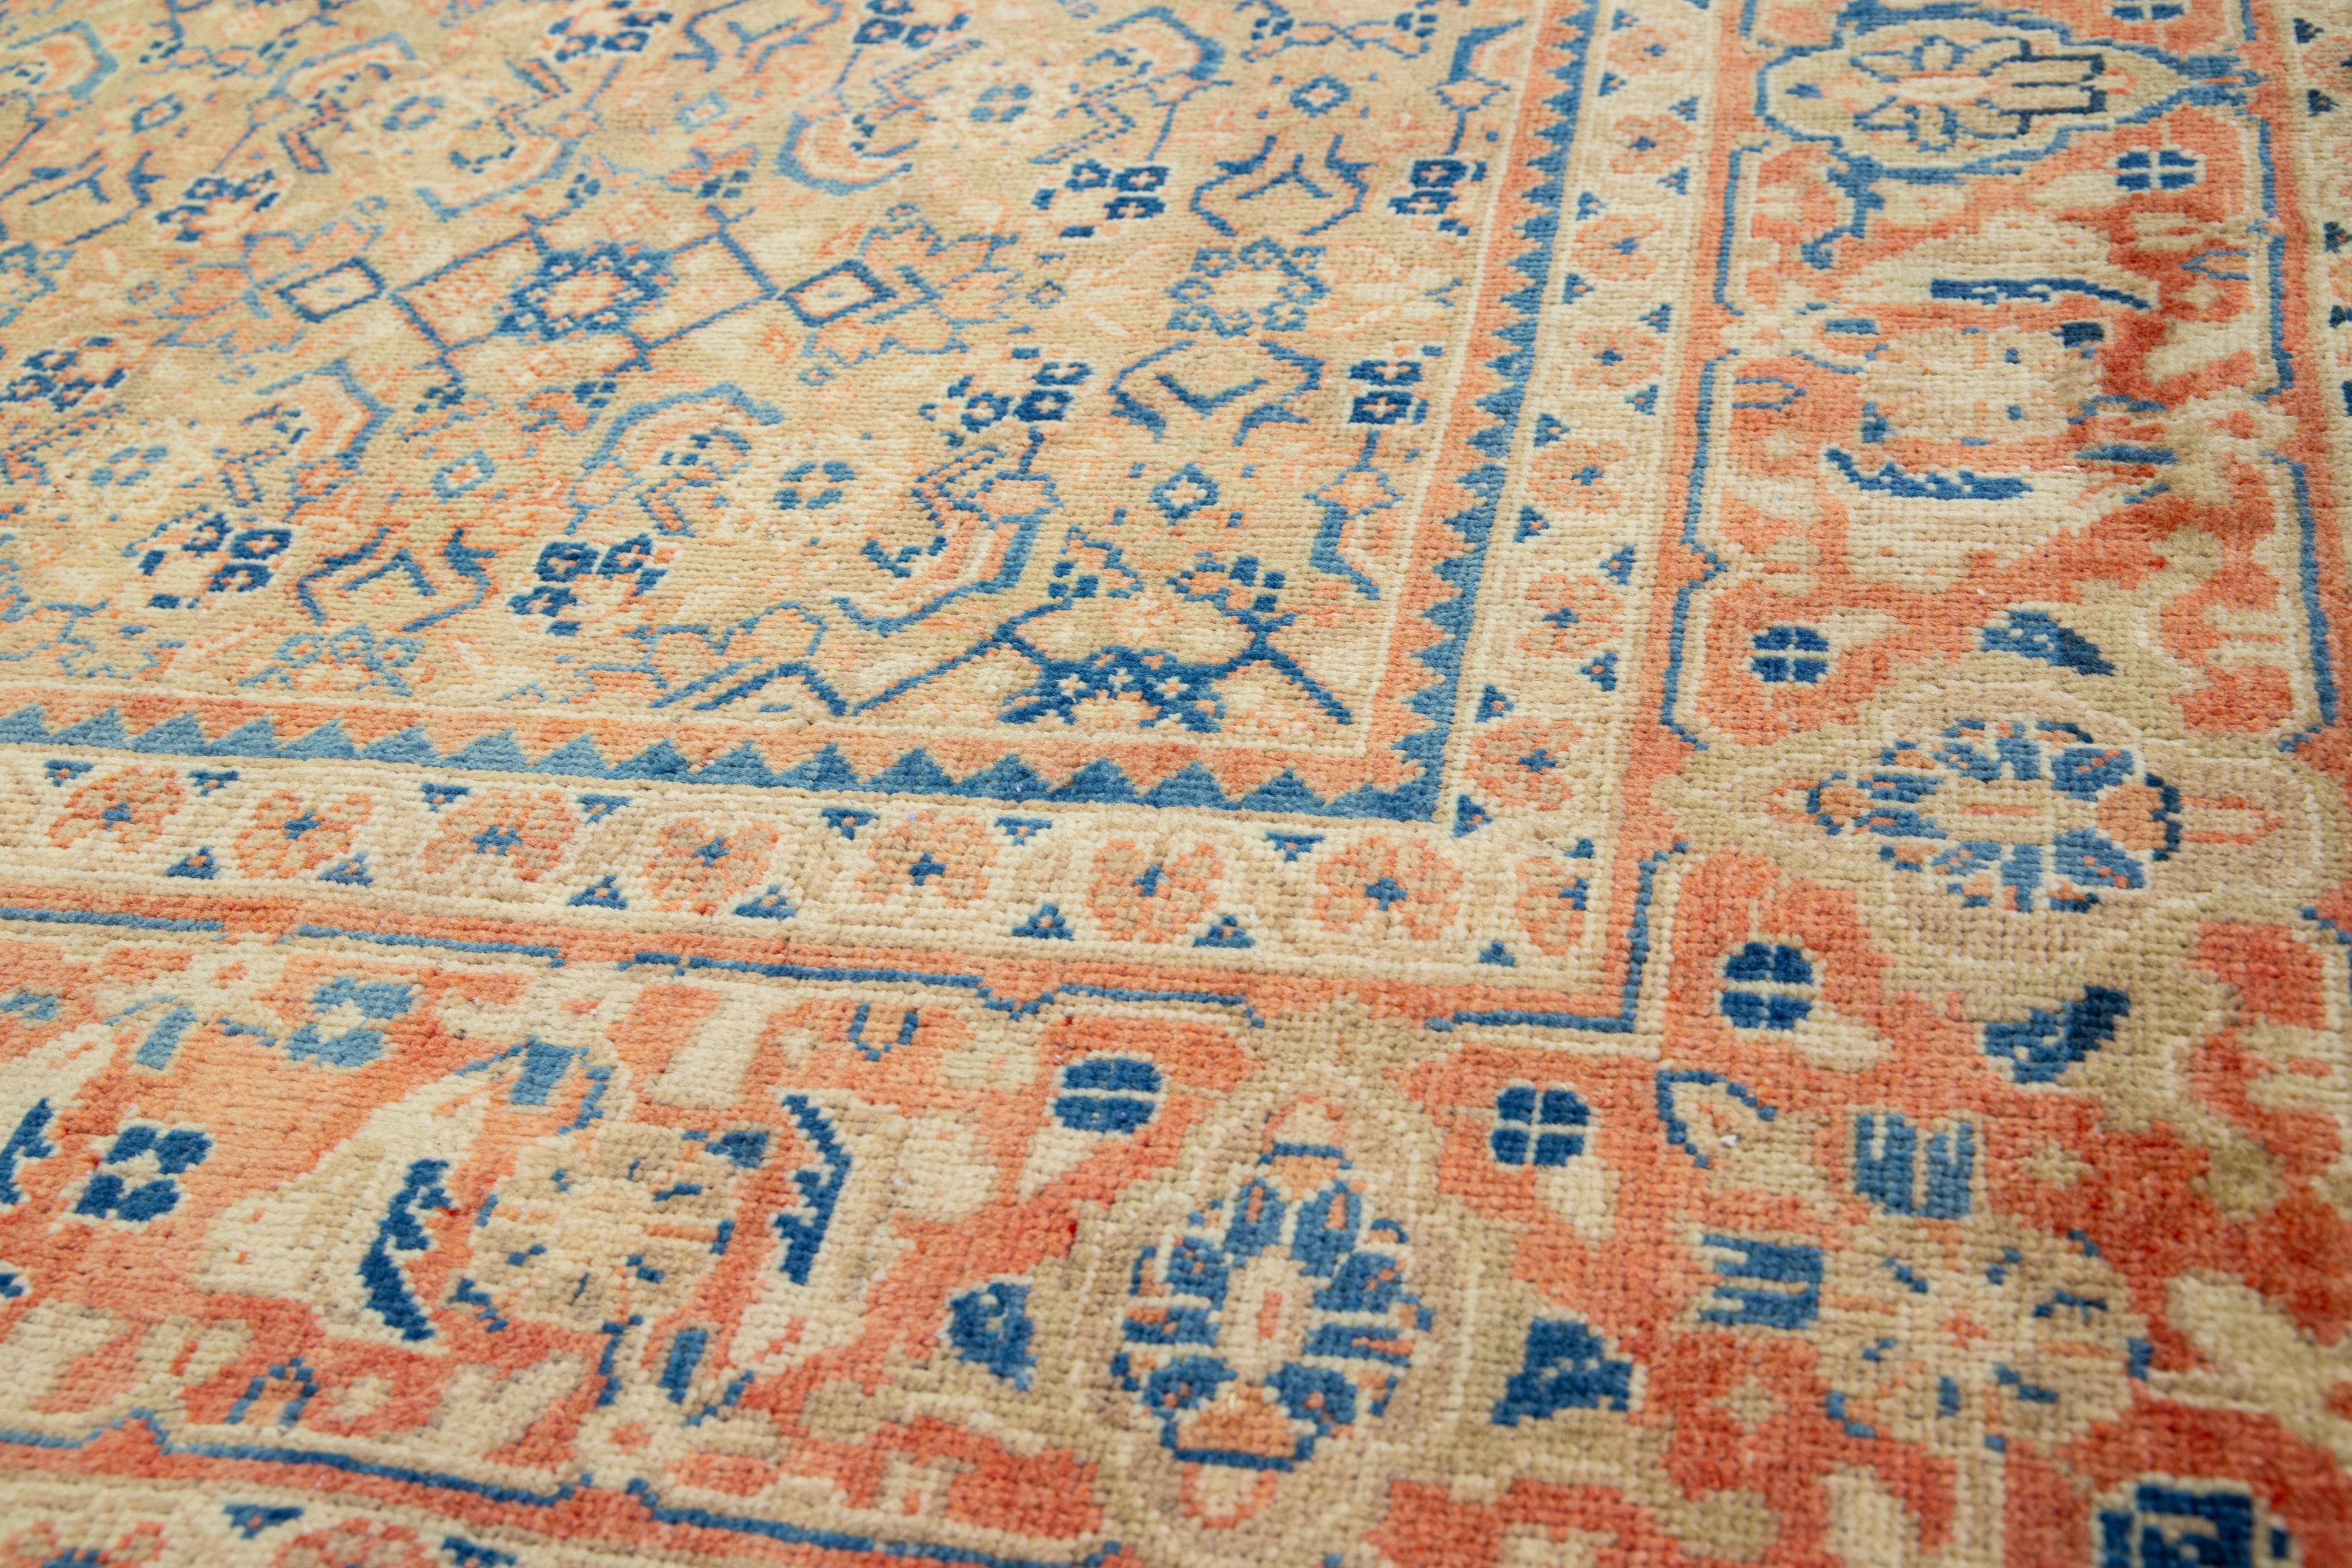  1920s Brown Antique Wool Rug Persian Mahal With Floral Pattern  For Sale 3